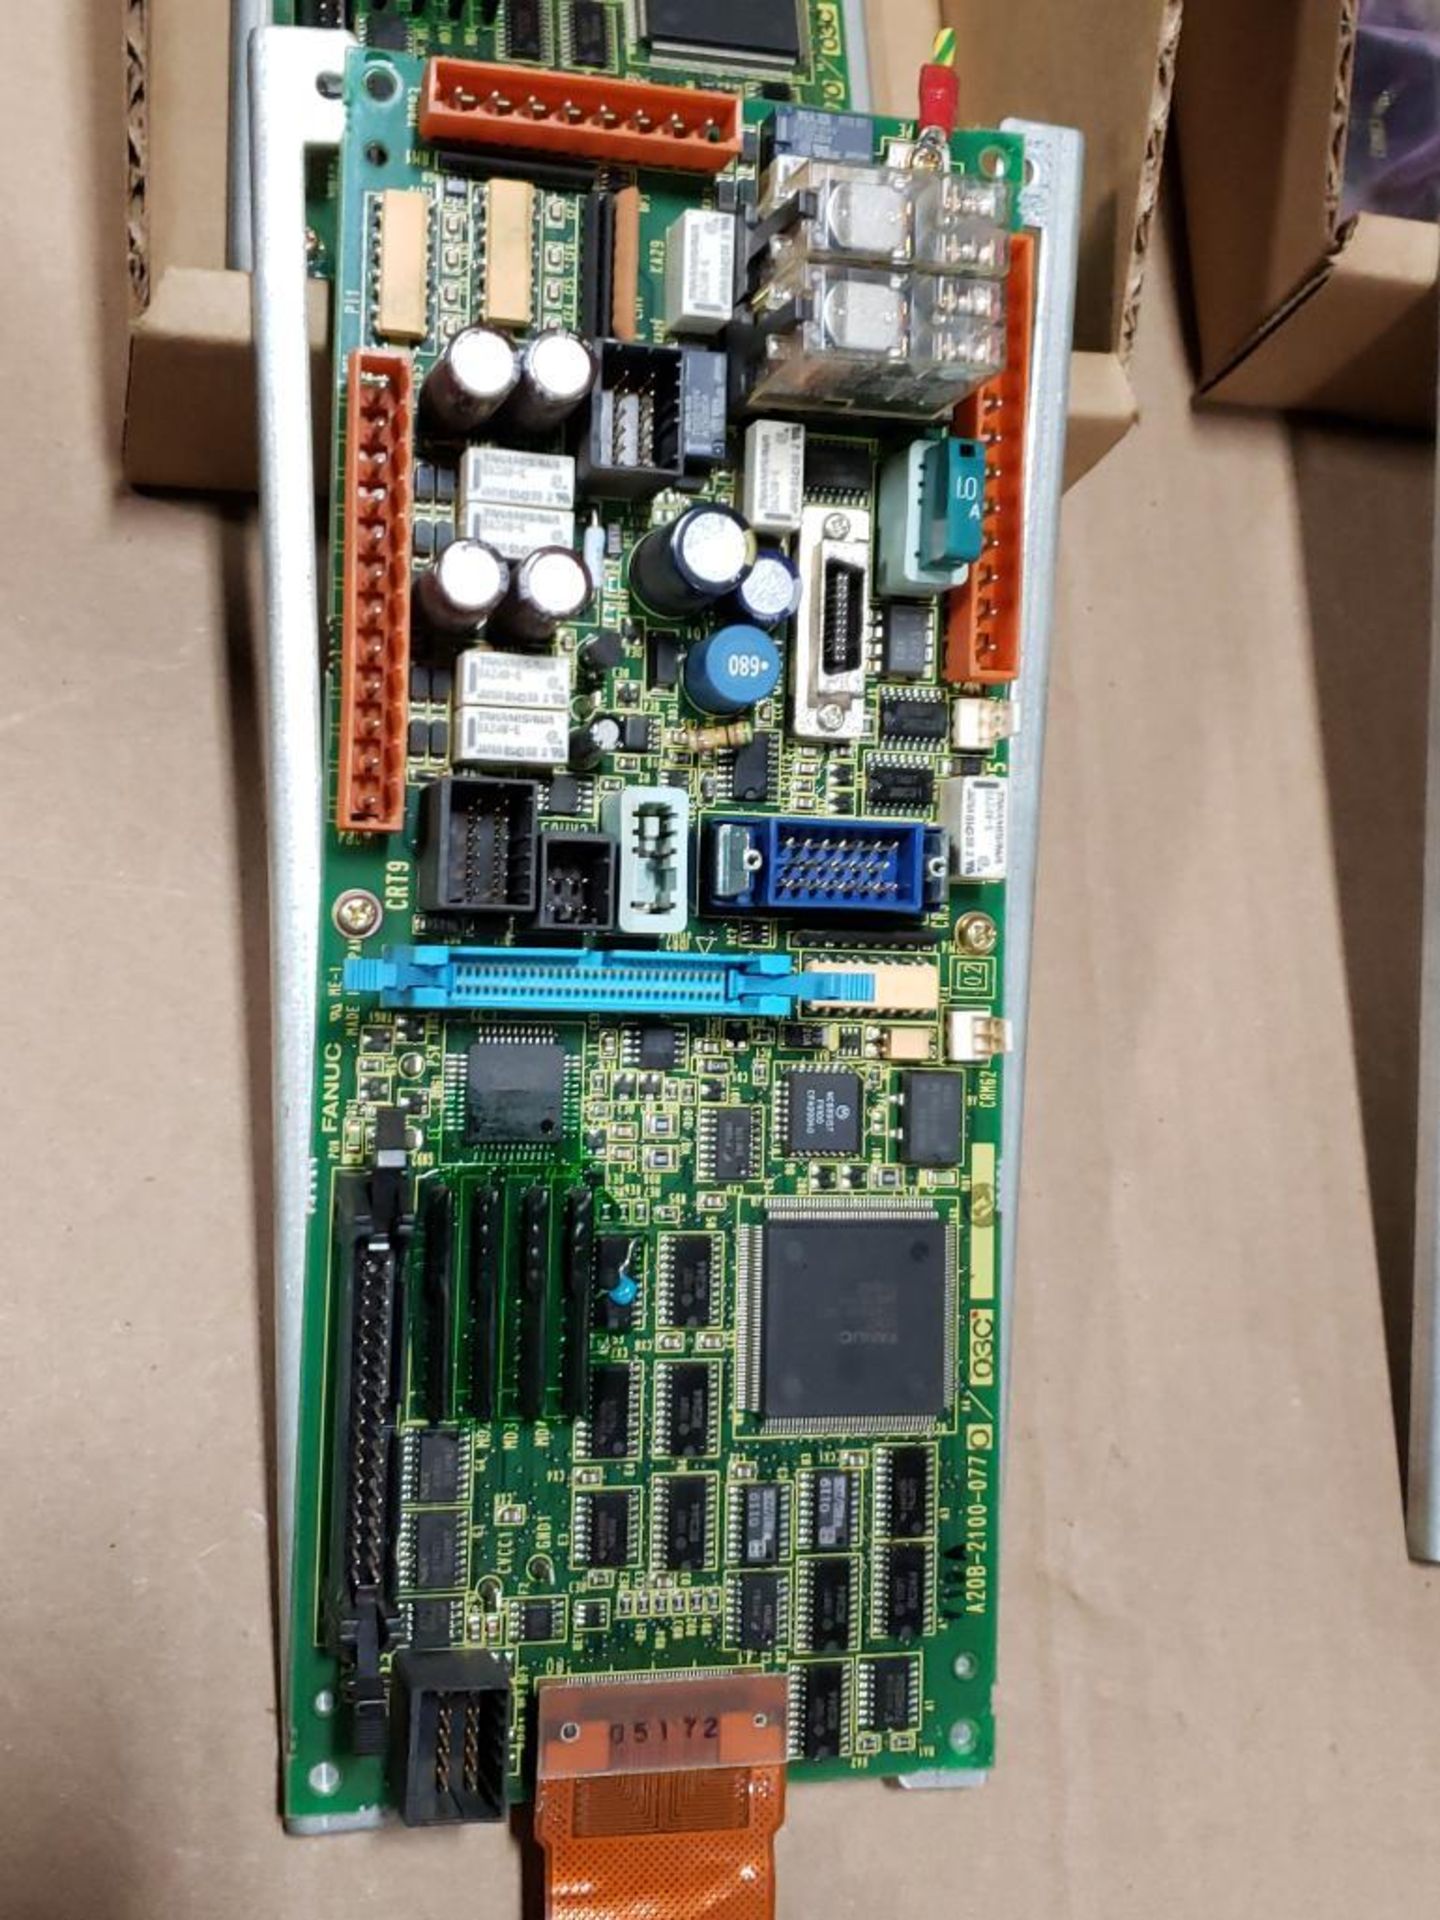 Qty 2 - Fanuc control boards. Part number A20B-2100-0770/03C. - Image 2 of 4